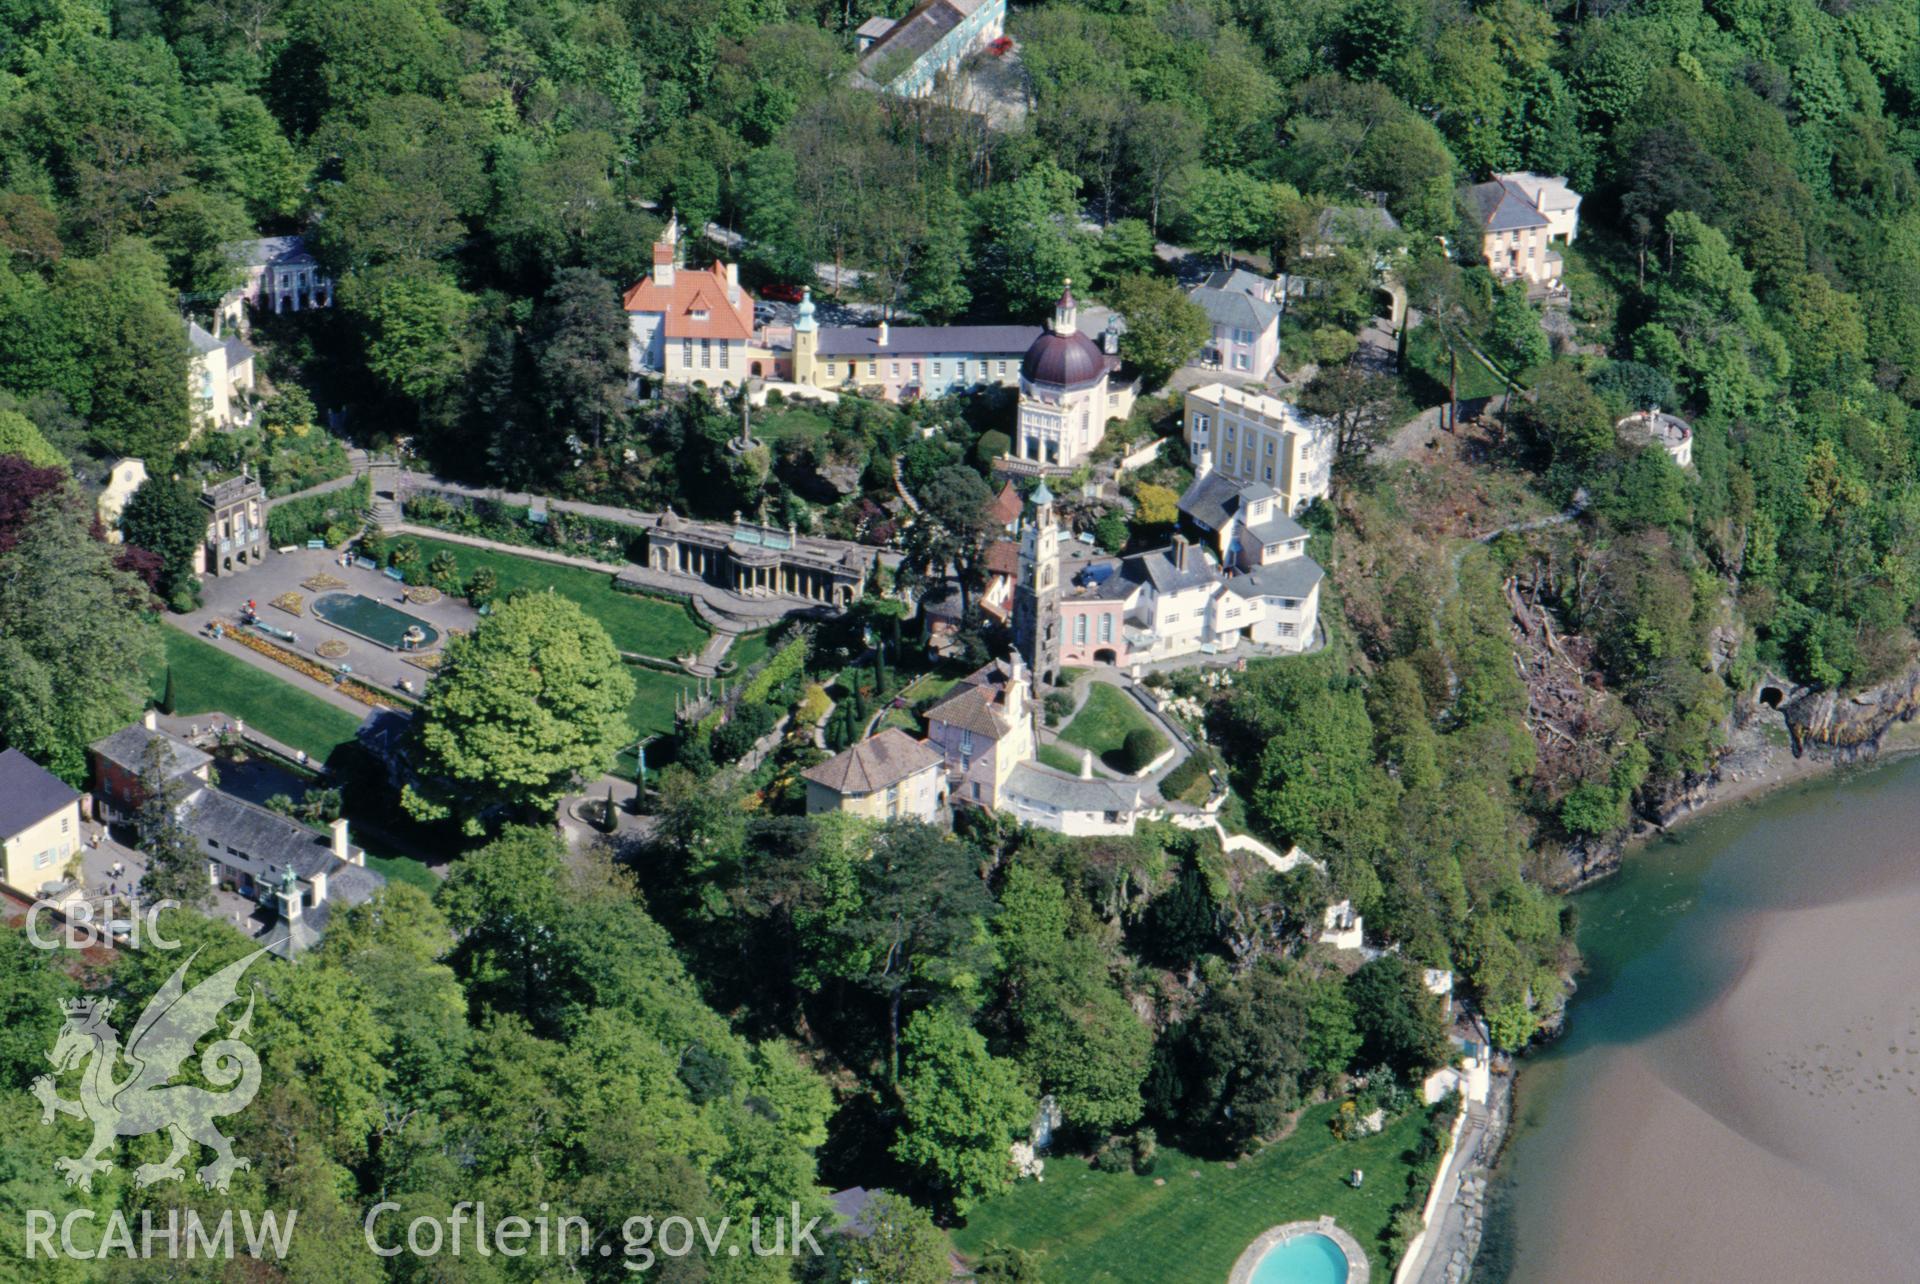 Slide of RCAHMW colour oblique aerial photograph of Portmeirion, taken by C.R. Musson, 4/5/1993.